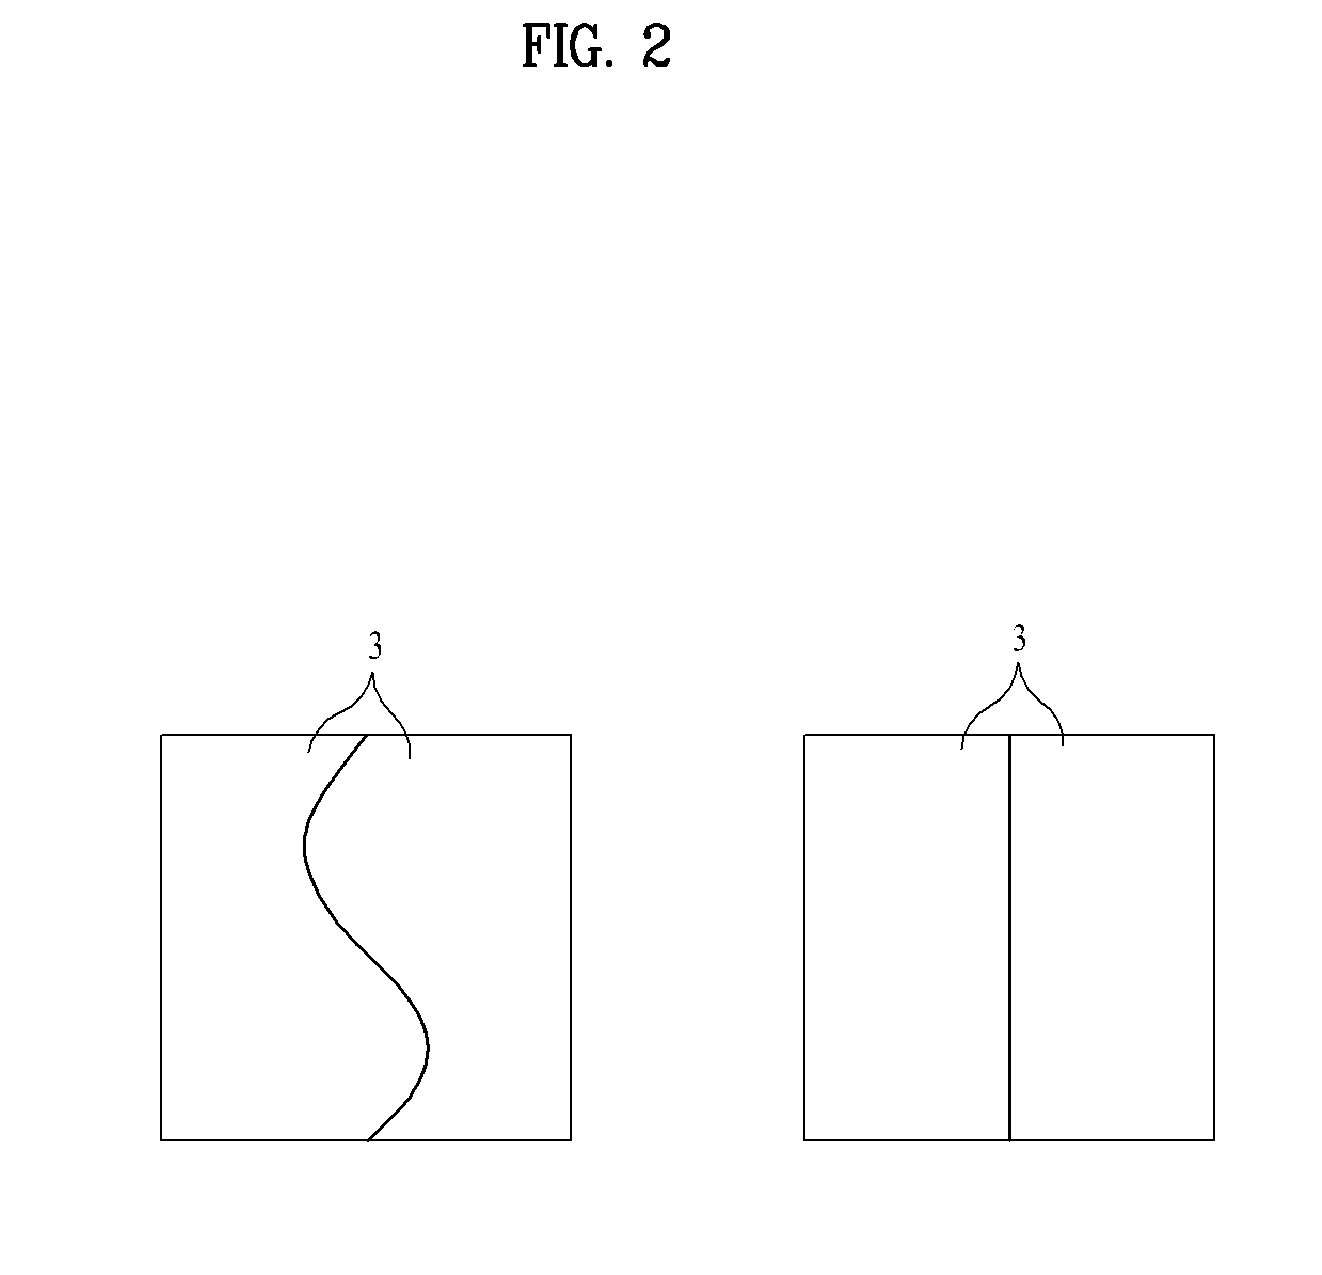 Transepidermal drug delivery system containing tulobuterol